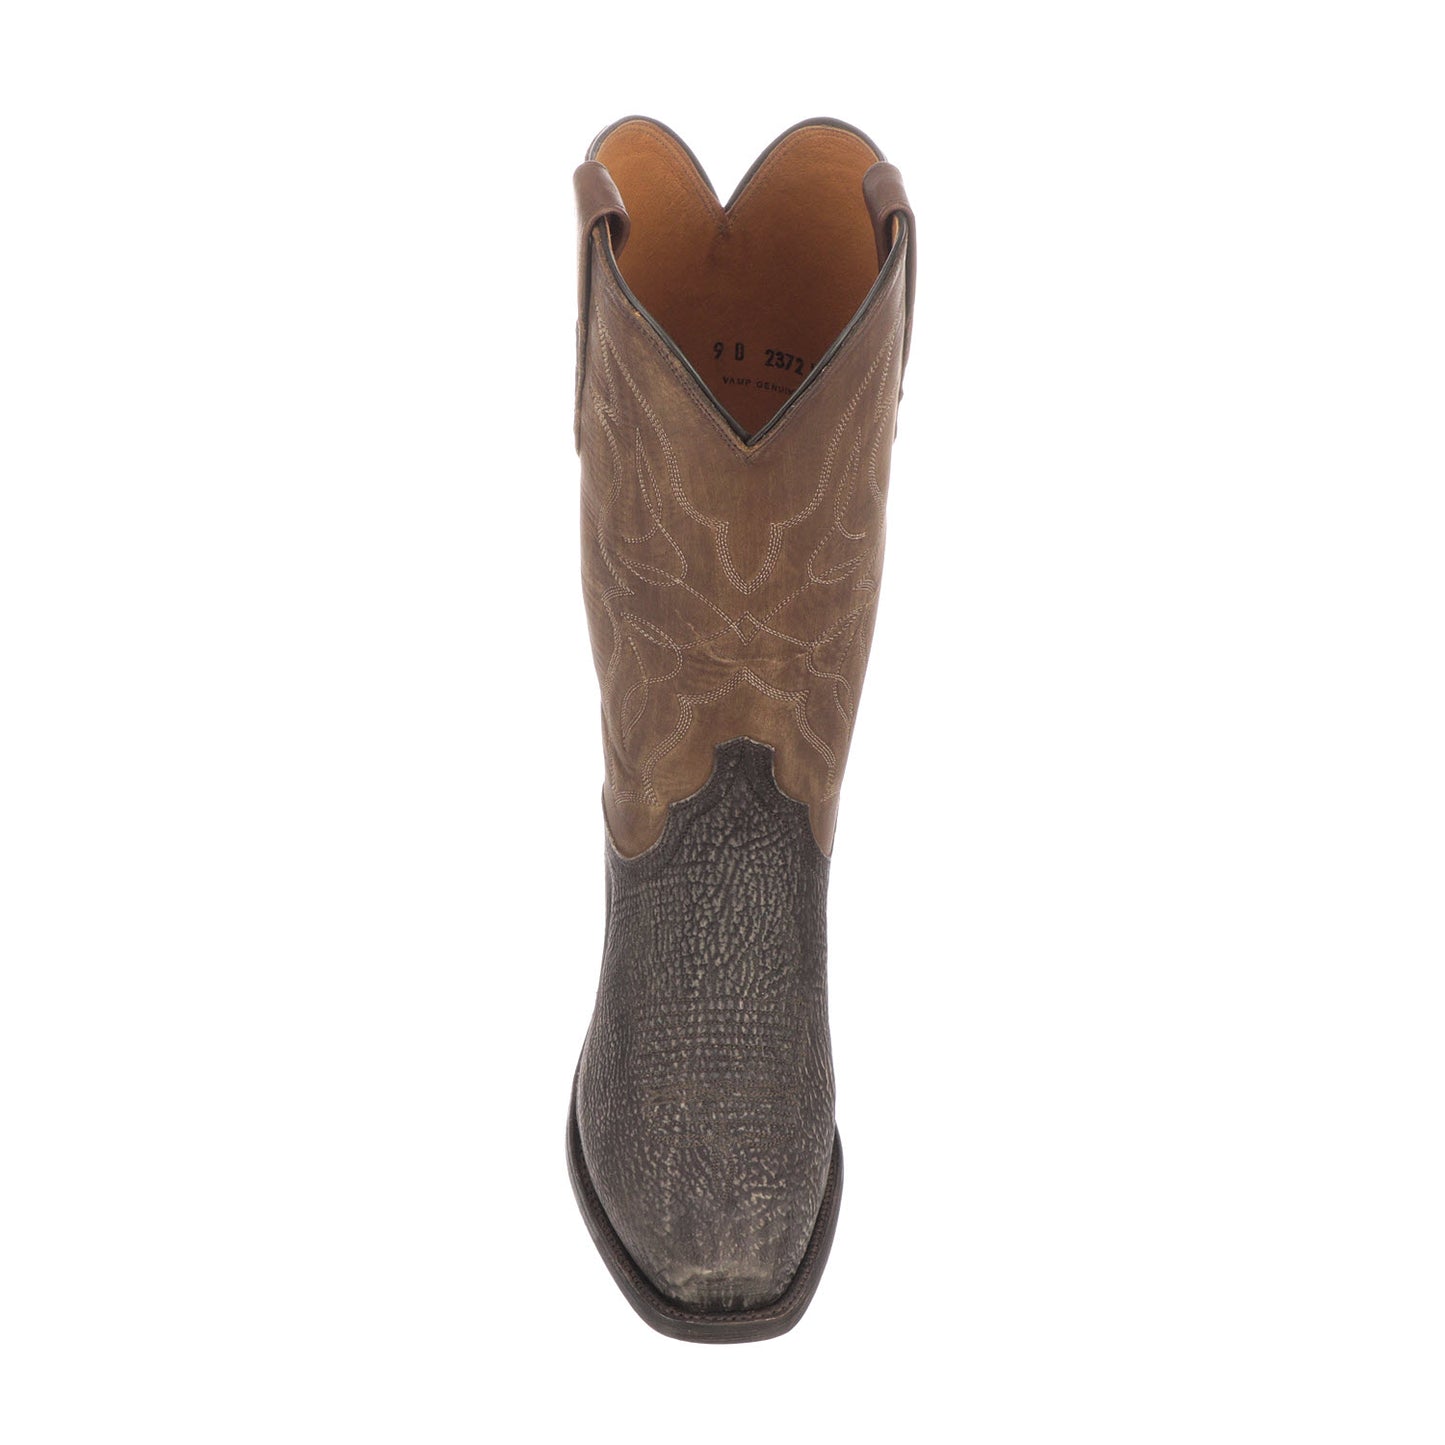 Lucchese Men's Carl Boot - Chocolate